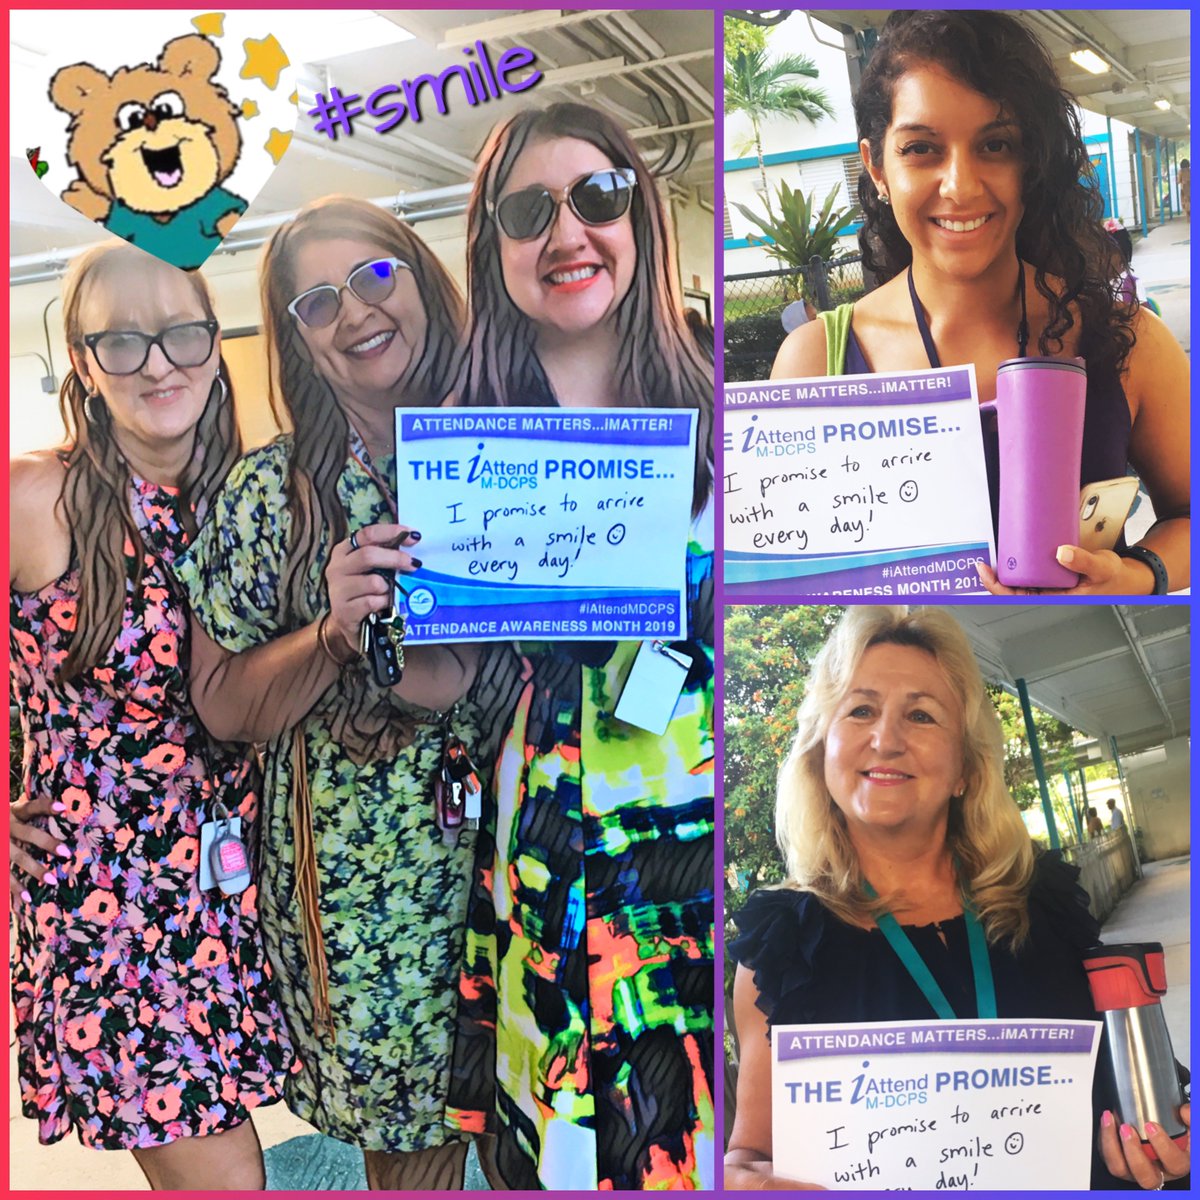 Our unspoken morning promise? 😀arrive with a #smile #everyday ...supported by all stakeholders, ASD staff and paraprofessionals, Speech pathologist, and Reading Coach! #iATTENDMDCPS #MDCPSPartners  #flapanthers